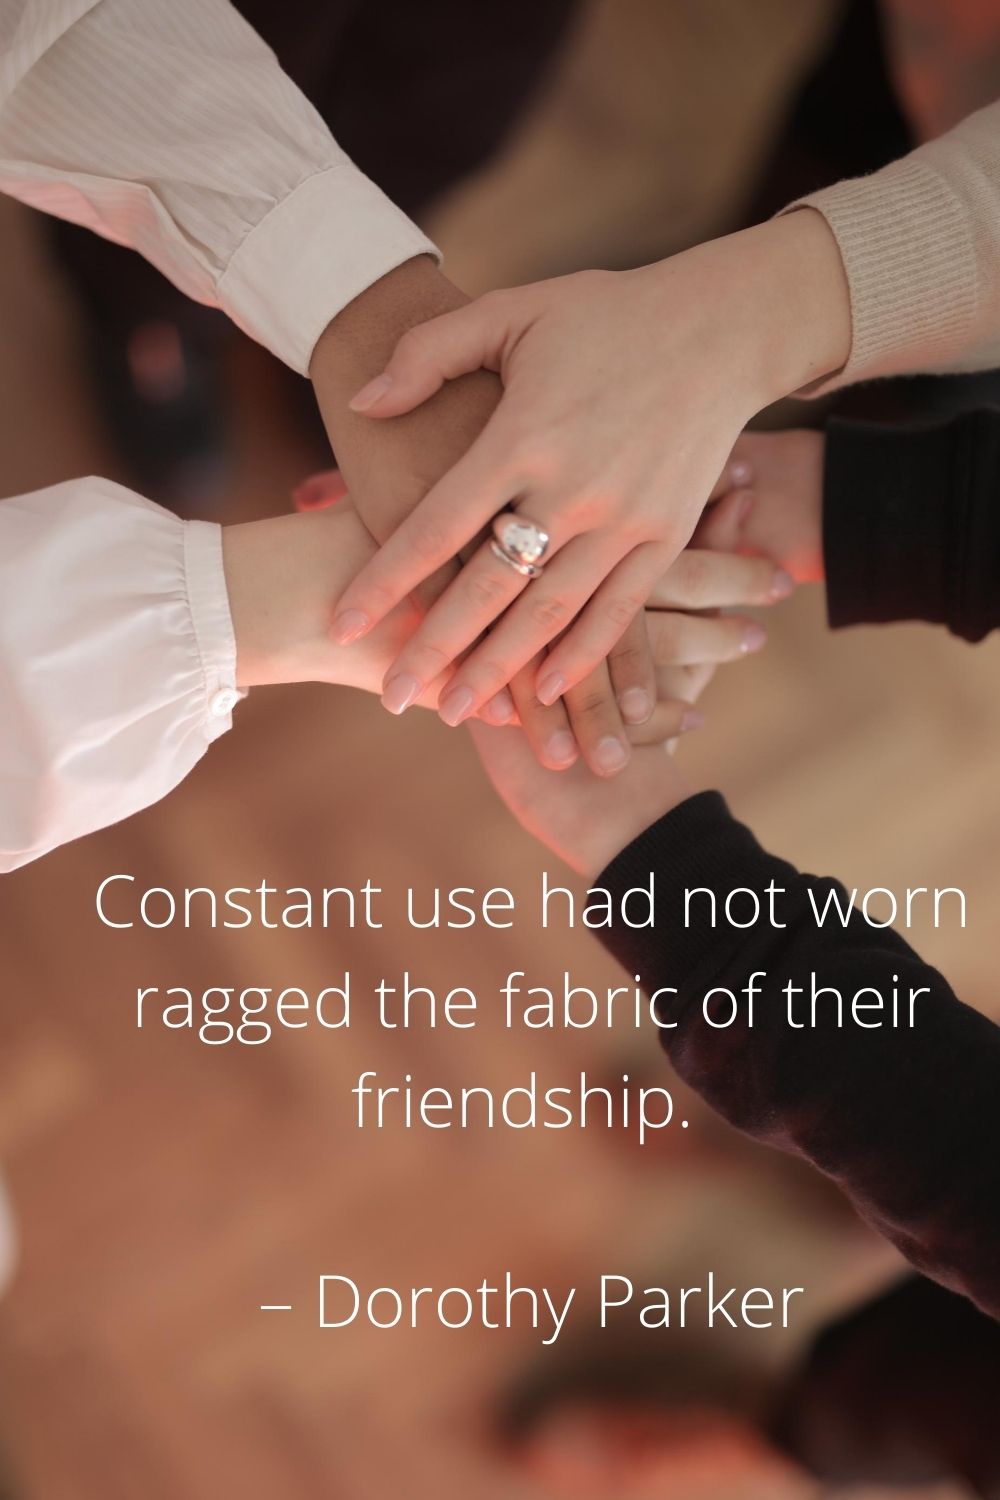 Constant use had not worn ragged the fabric of their friendship. – Dorothy Parker